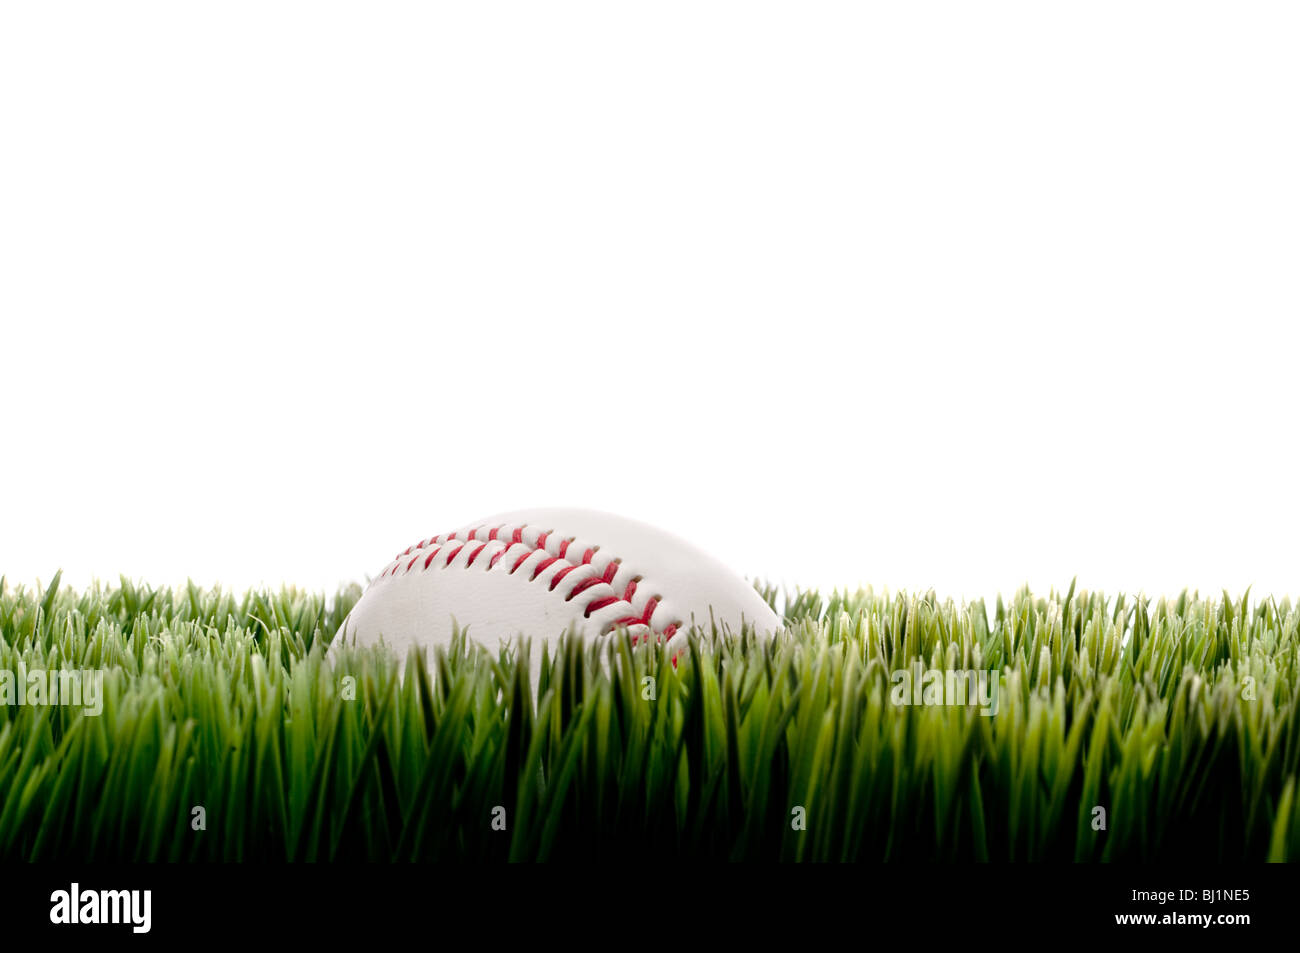 Horizontal image of a baseball on tall grass on white with copy space Stock Photo